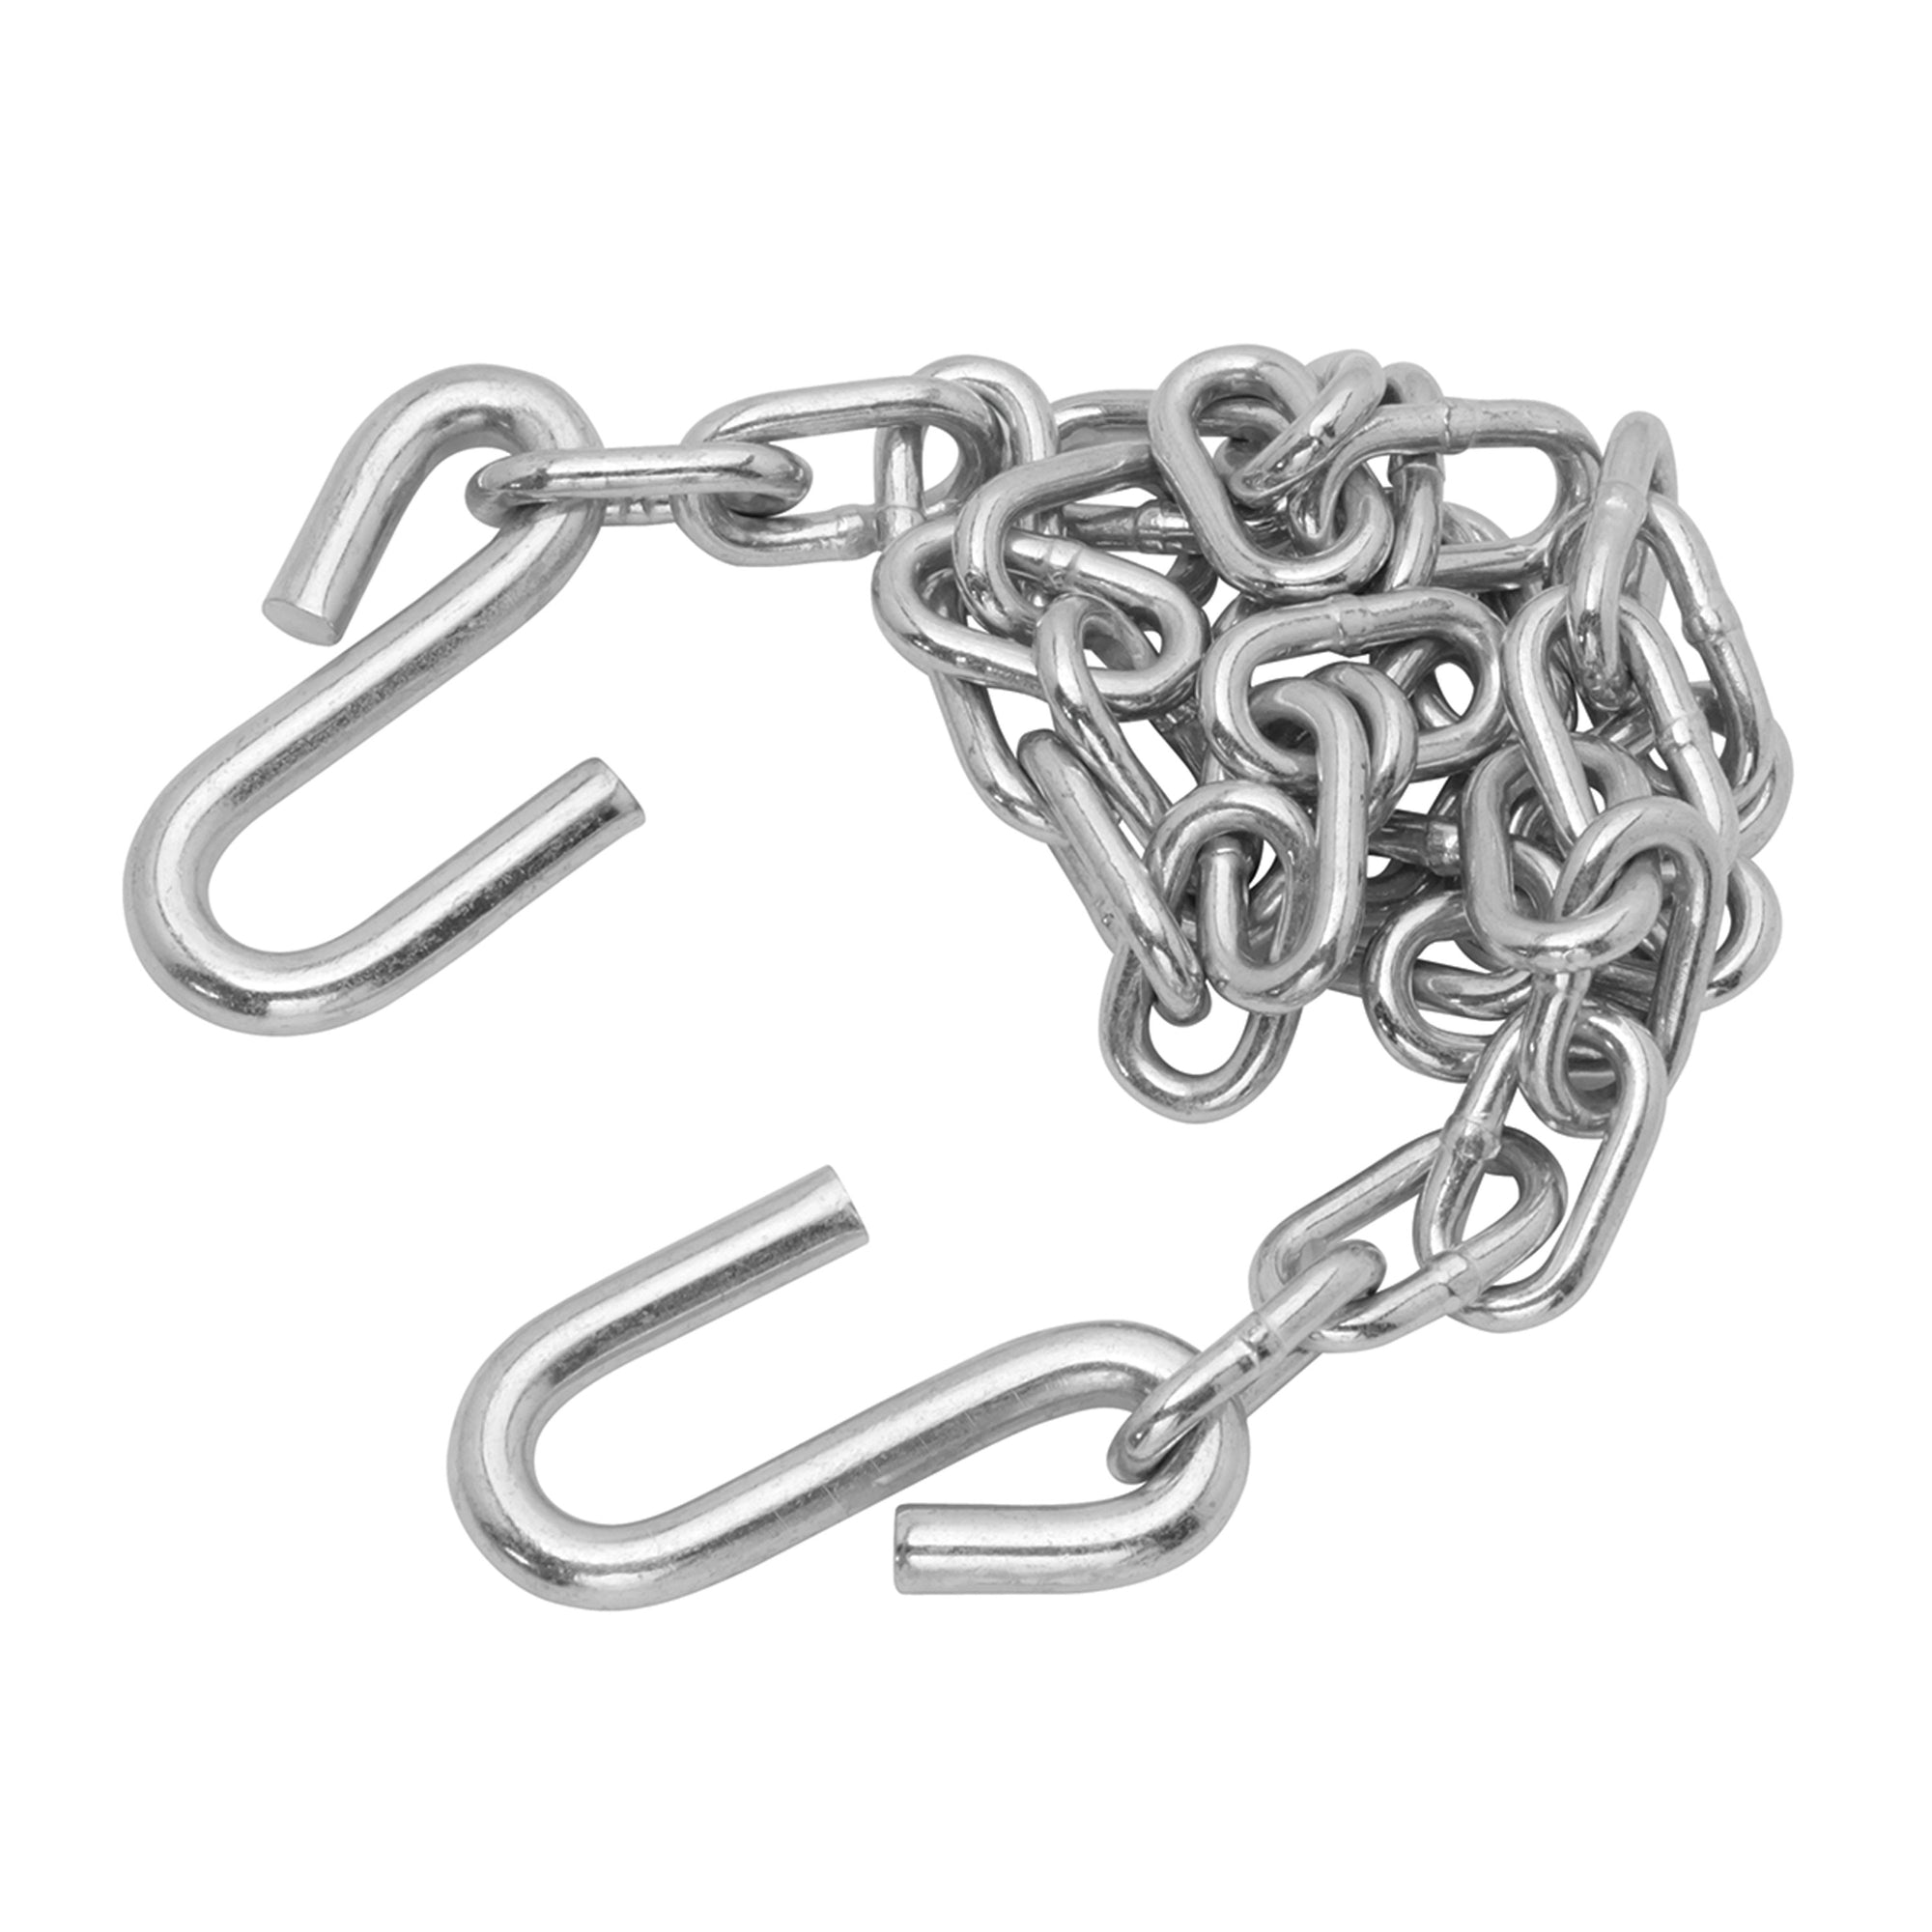 Reese 63034 Class I Trailer Hitch Safety Chain - 72", GWR 2,000 lbs.